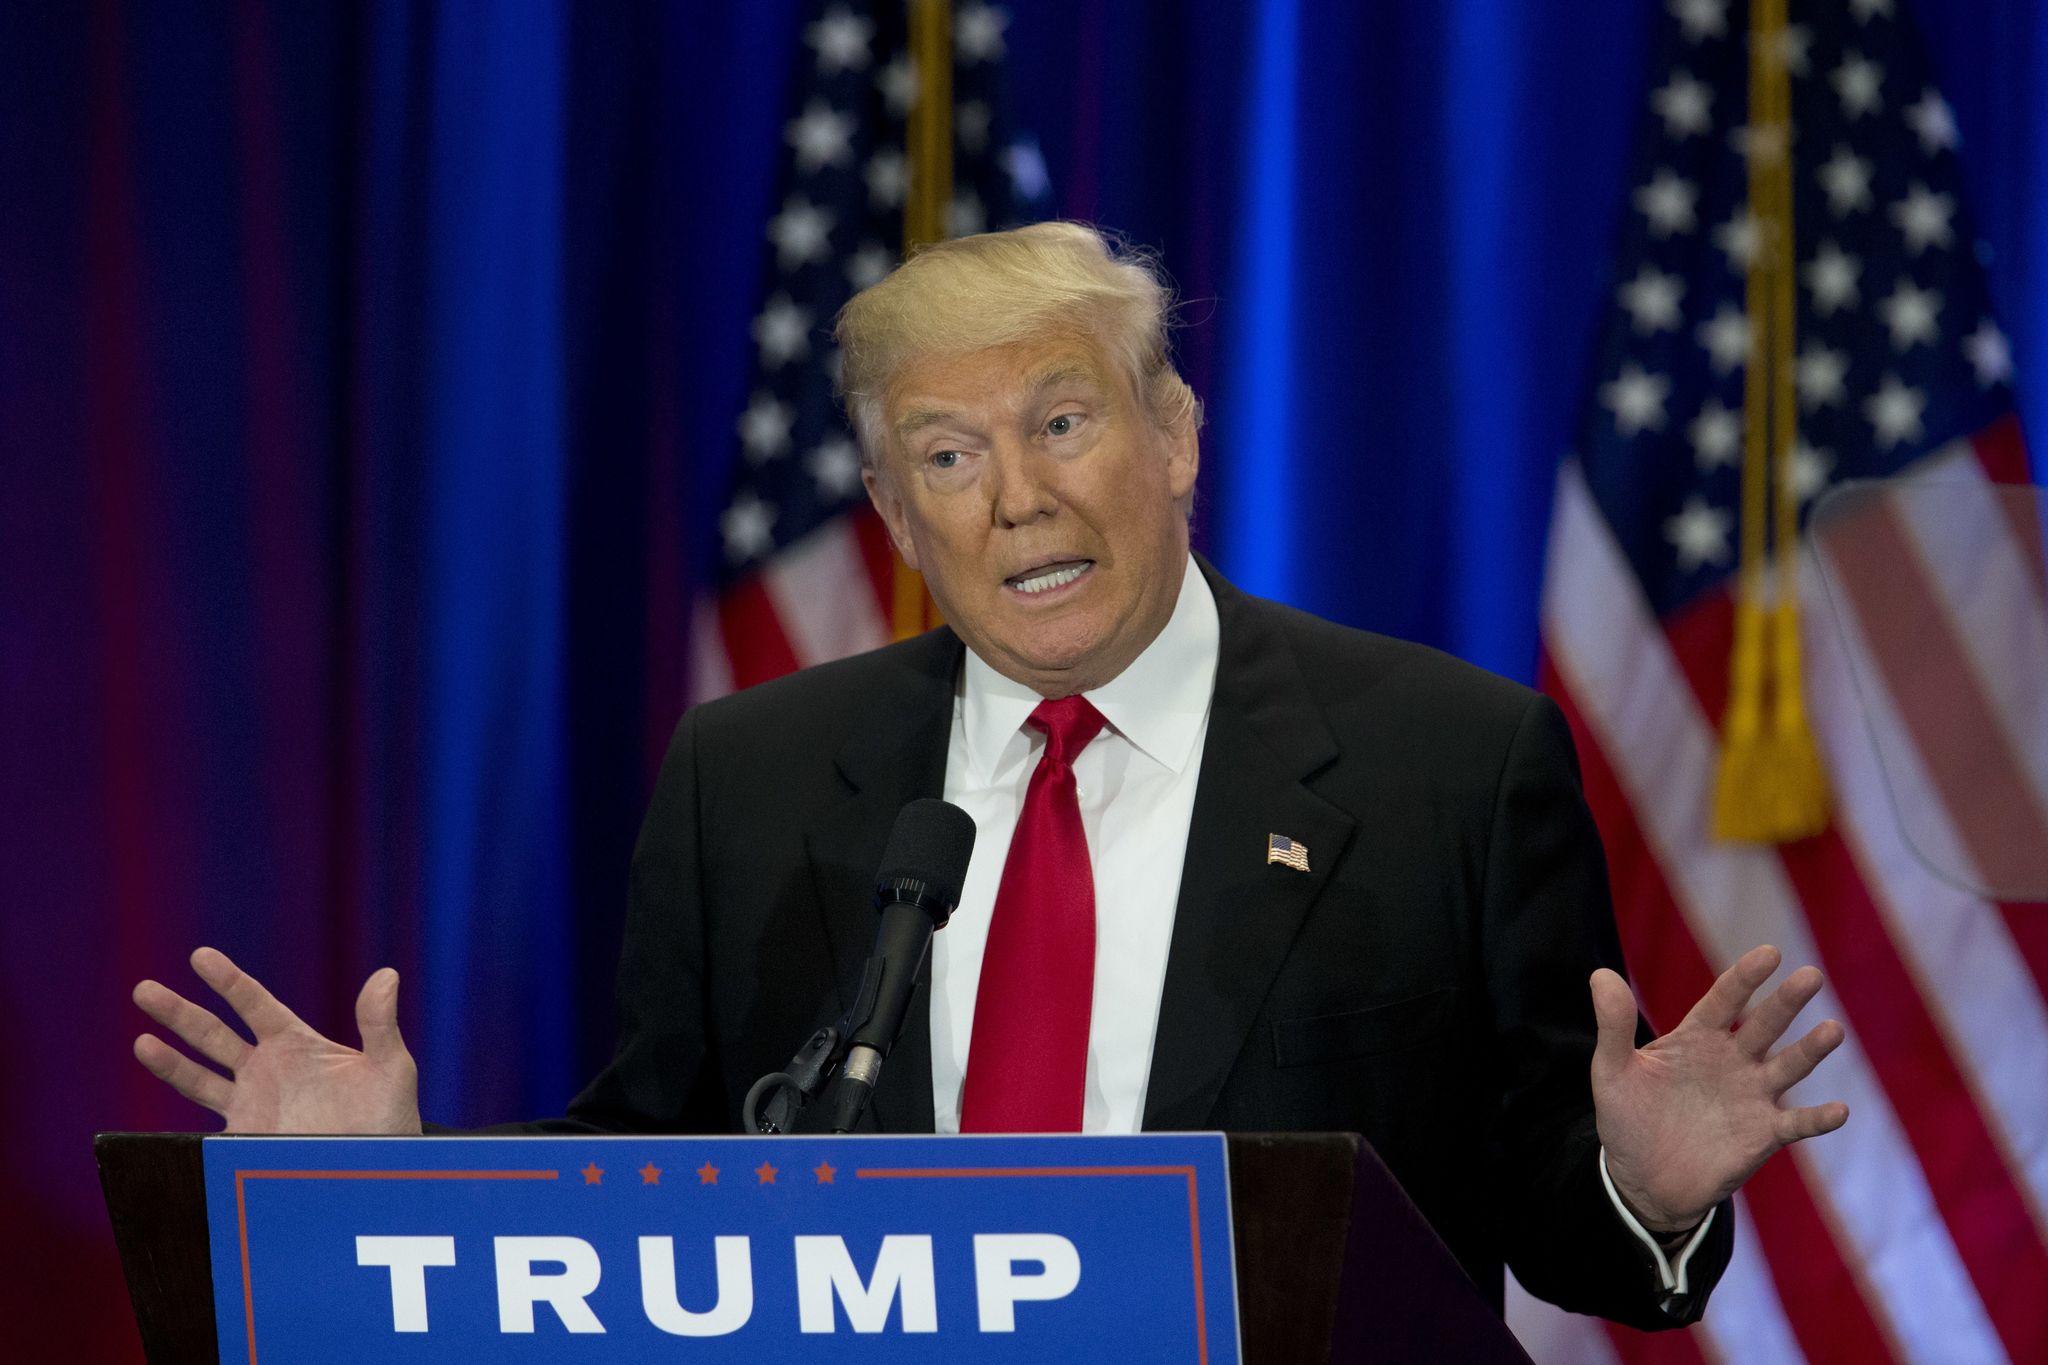 Republican presidential candidate Donald Trump speaks in New York on Wednesday.